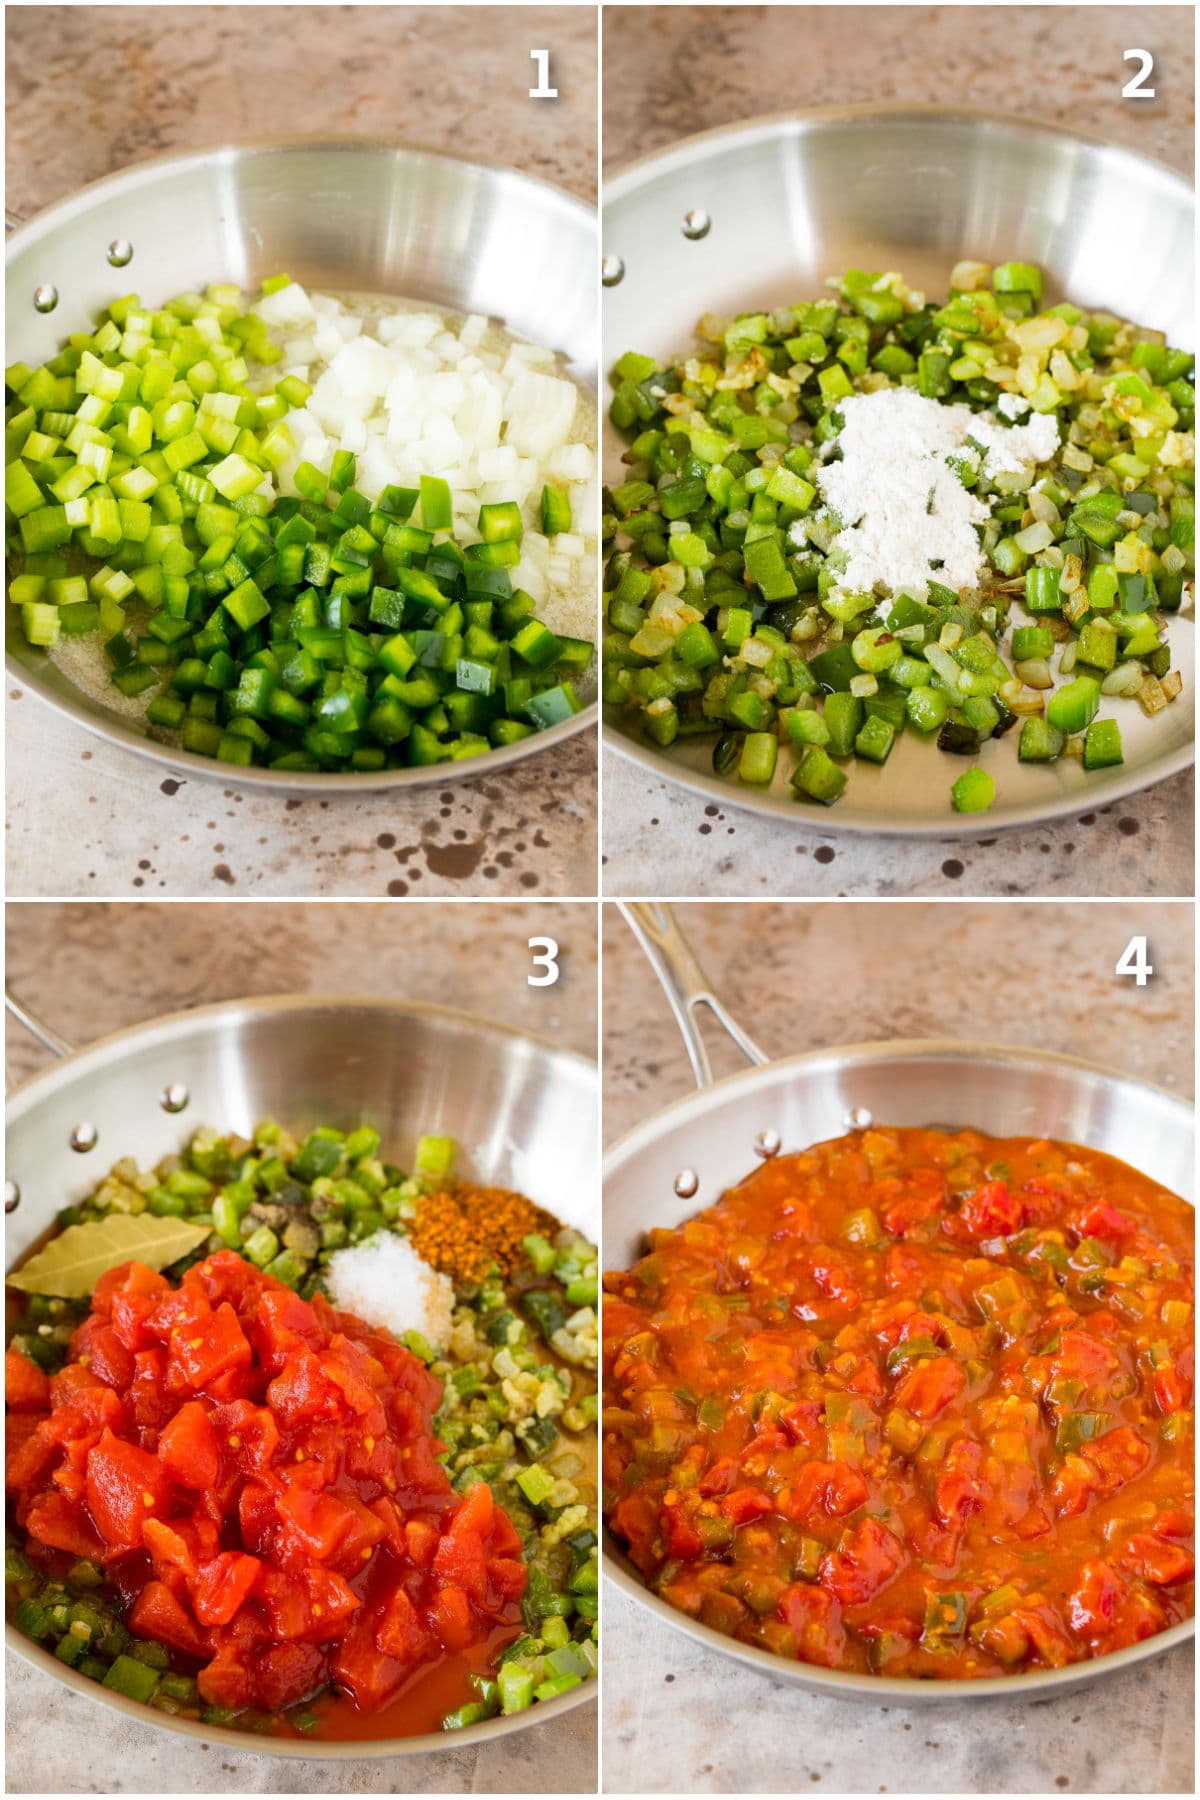 Step by step shots showing how to make Creole sauce.